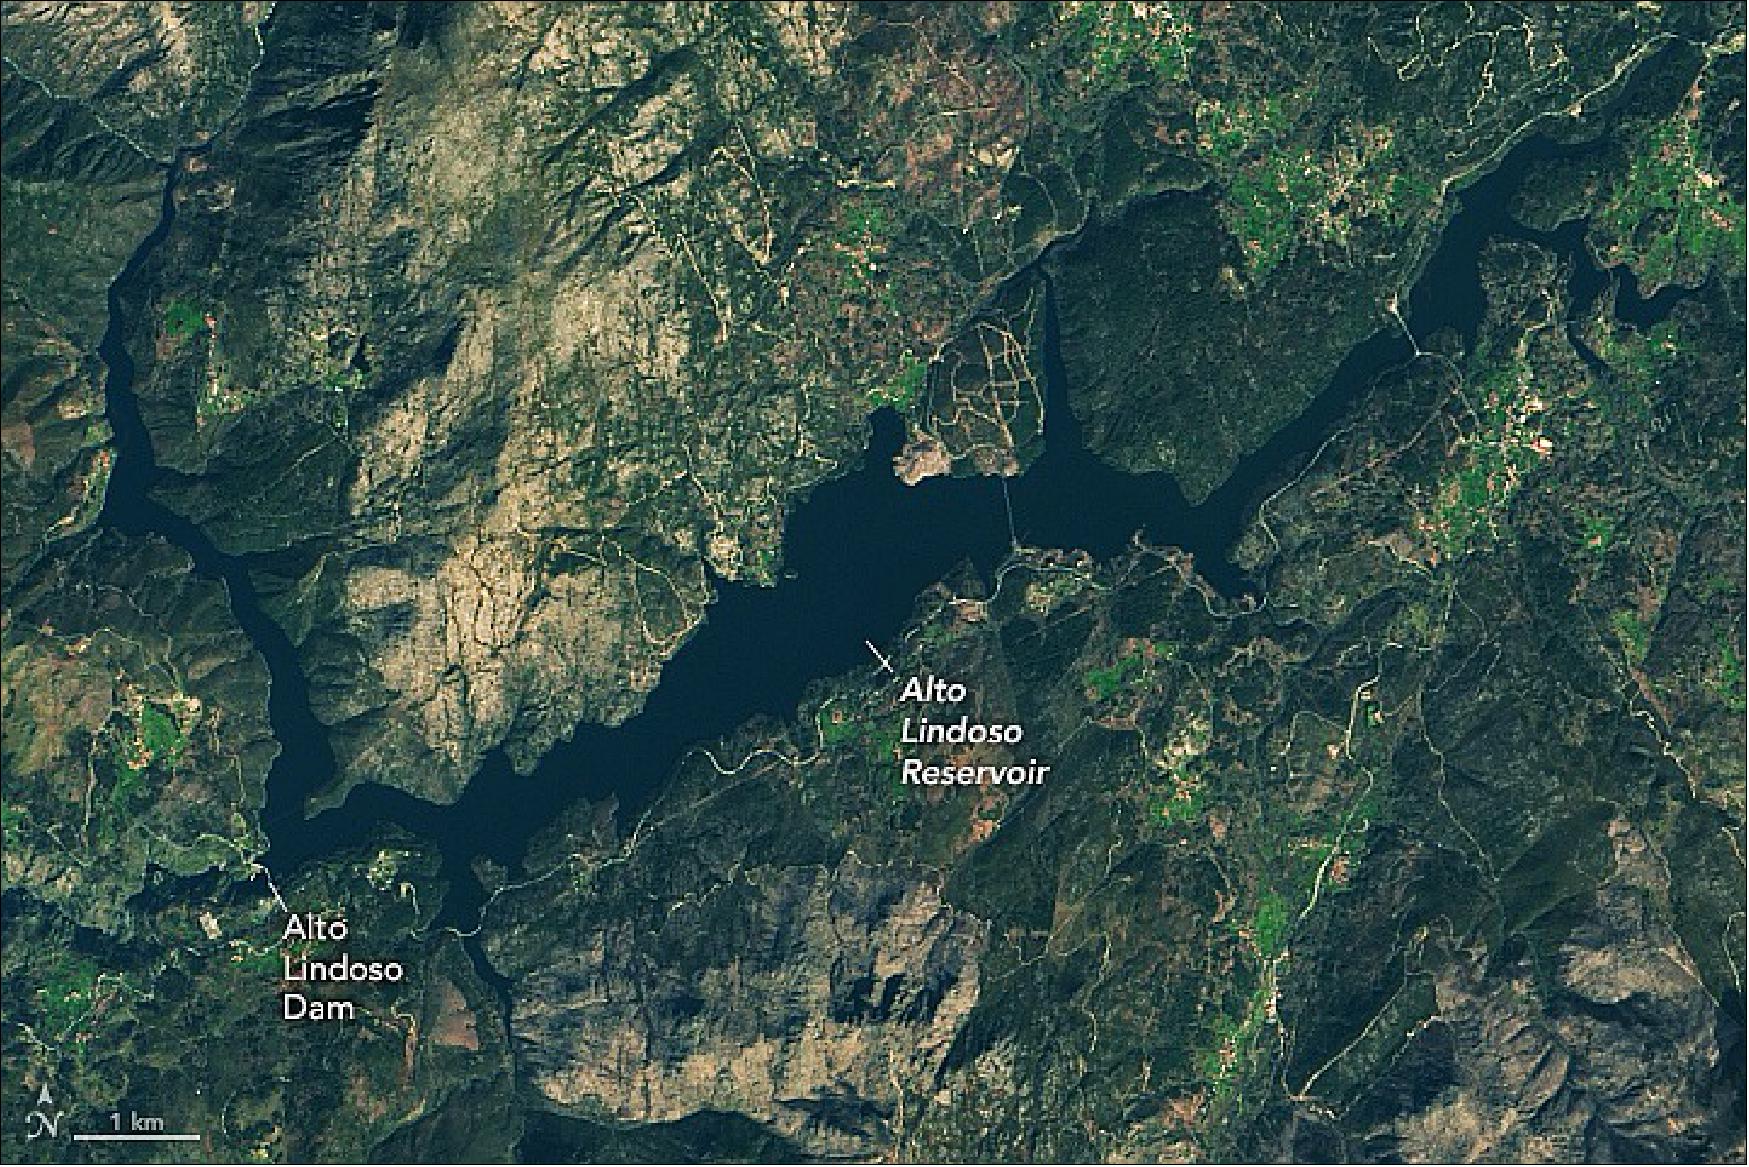 Figure 73: These pairs of images (Figures 73 & 74 and Figure 75) reveal the low water levels and exposed shorelines of the Alto Rabagão and Alto Lindoso reservoirs in northern Portugal. All images were acquired by the Operational Land Imager (OLI) on Landsat 8 on March 6, 2021, and February 5, 2022 (image credit: NASA Earth Observatory images by Lauren Dauphin, using Landsat data from the U.S. Geological Survey. Story by Sara E. Pratt)